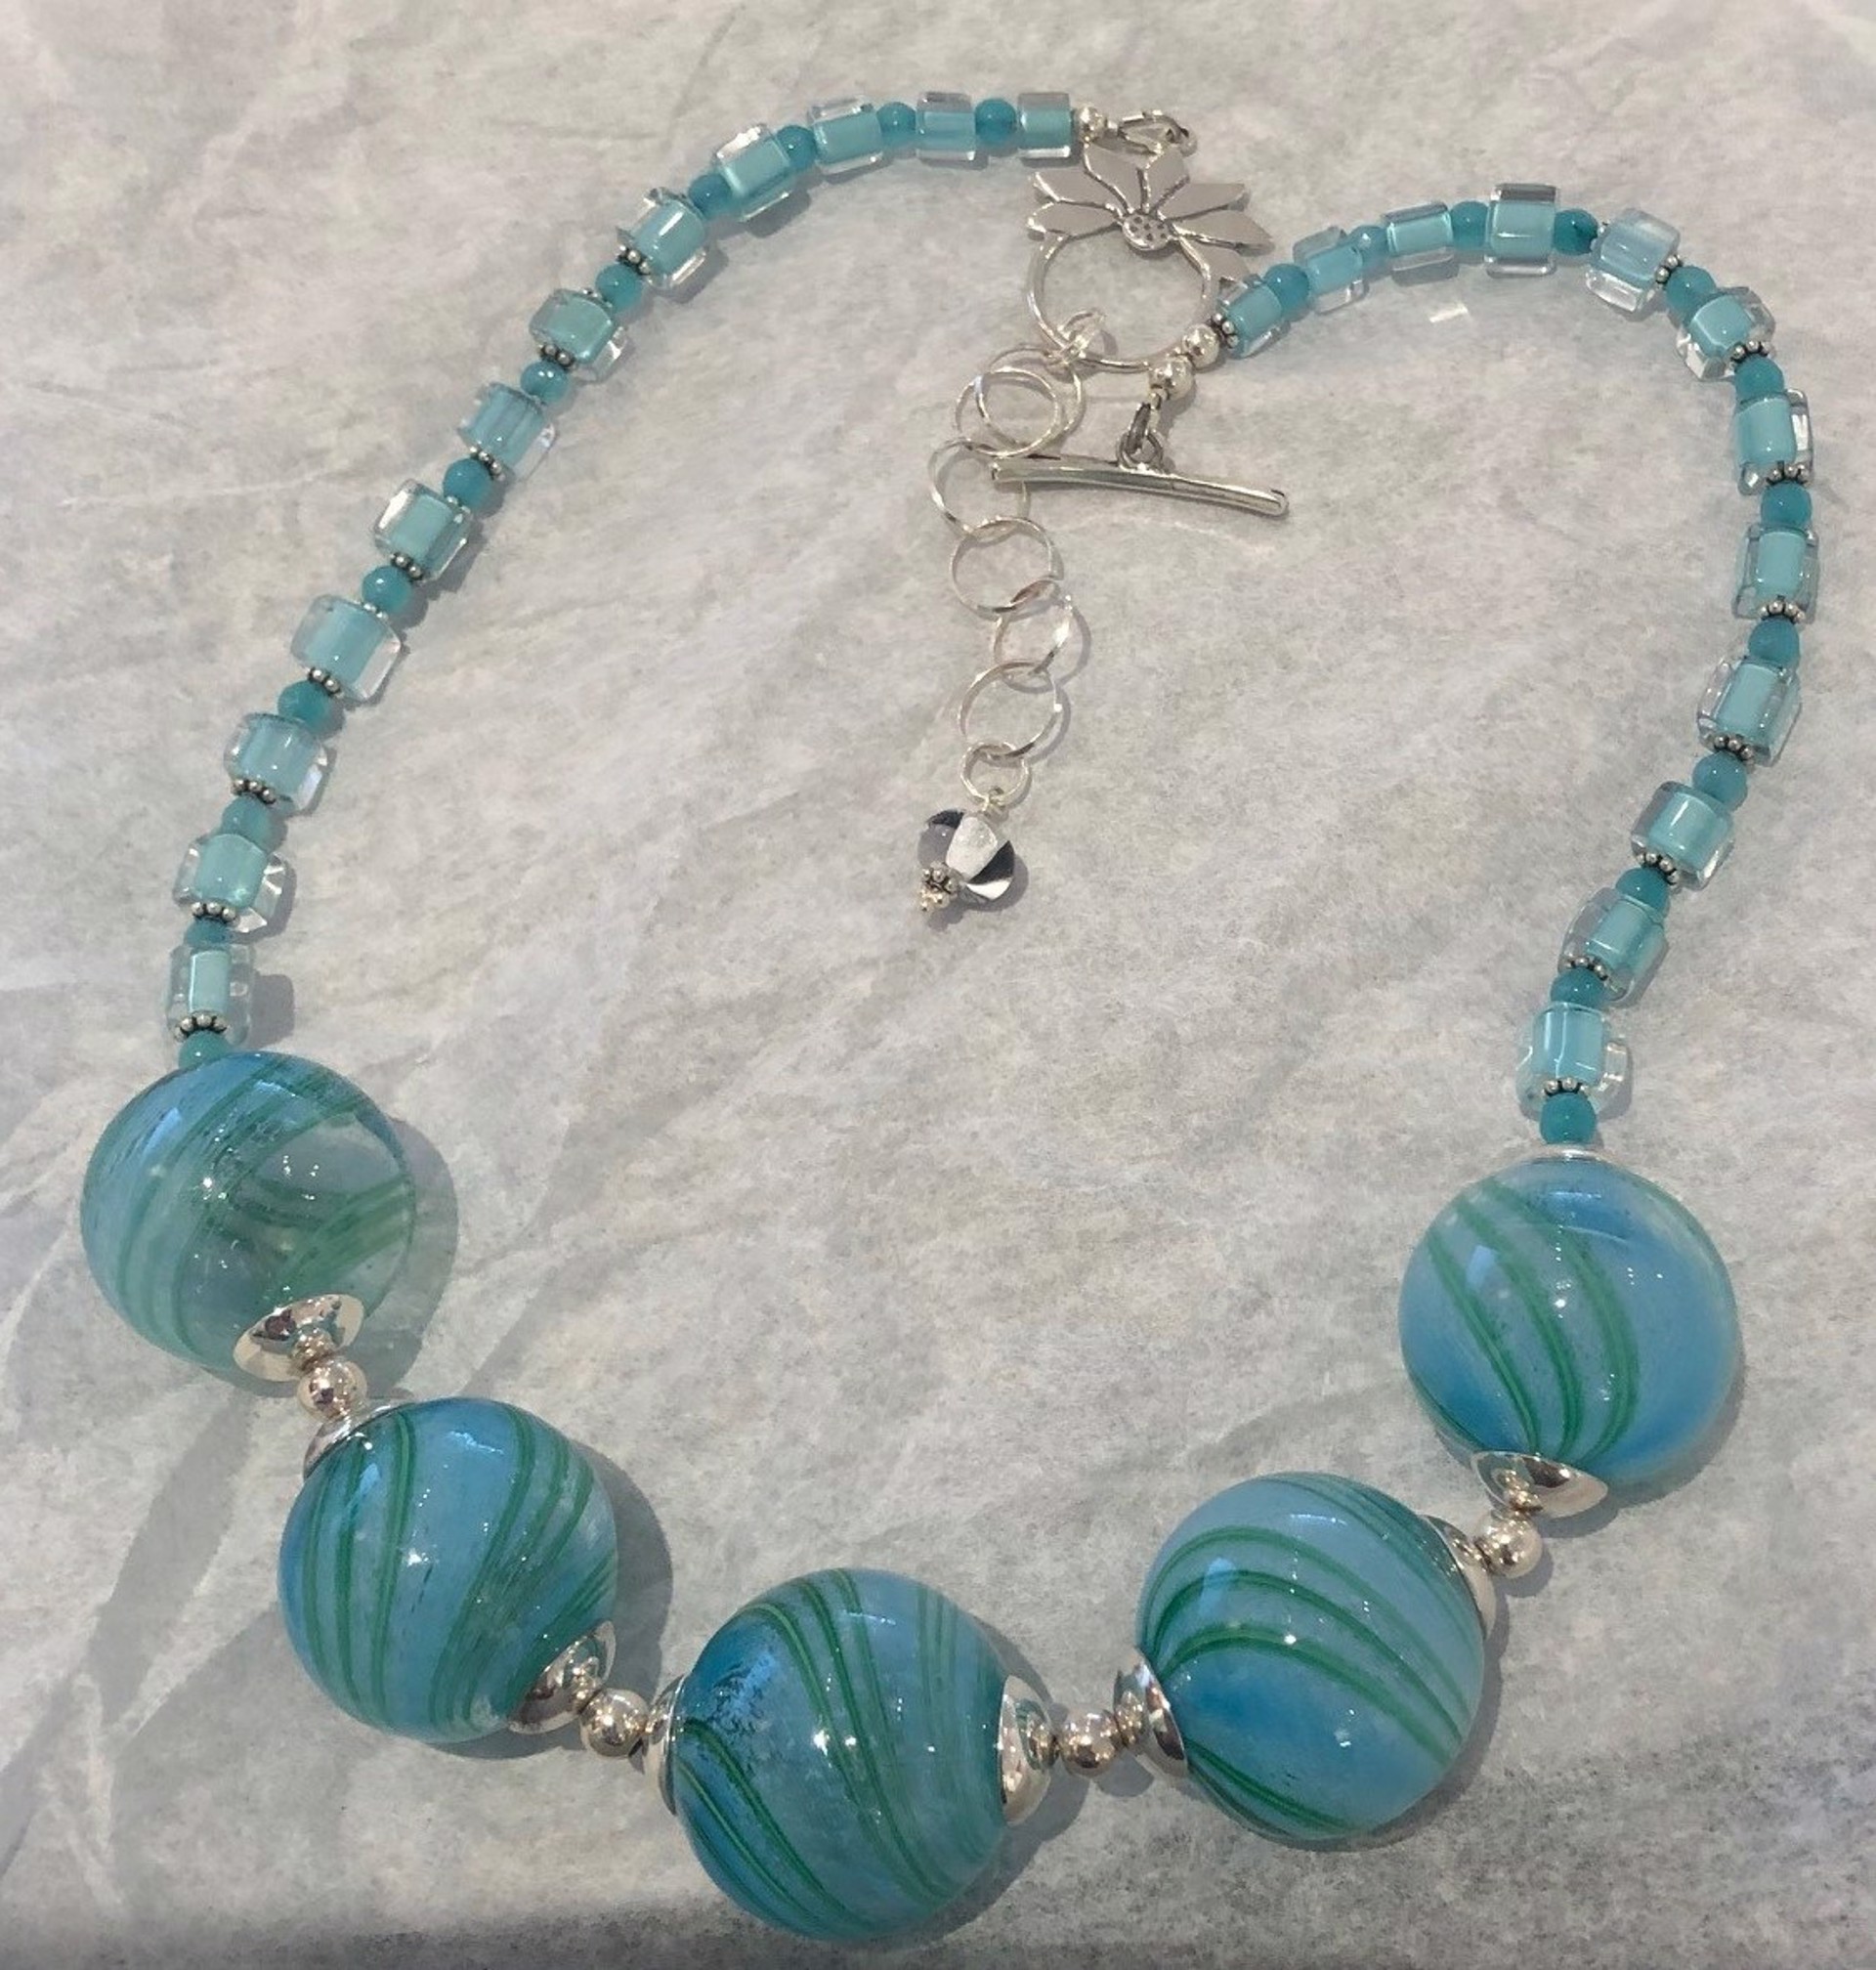 Necklace Blown Bead - 203080 by Virginia Wilson Toccalino